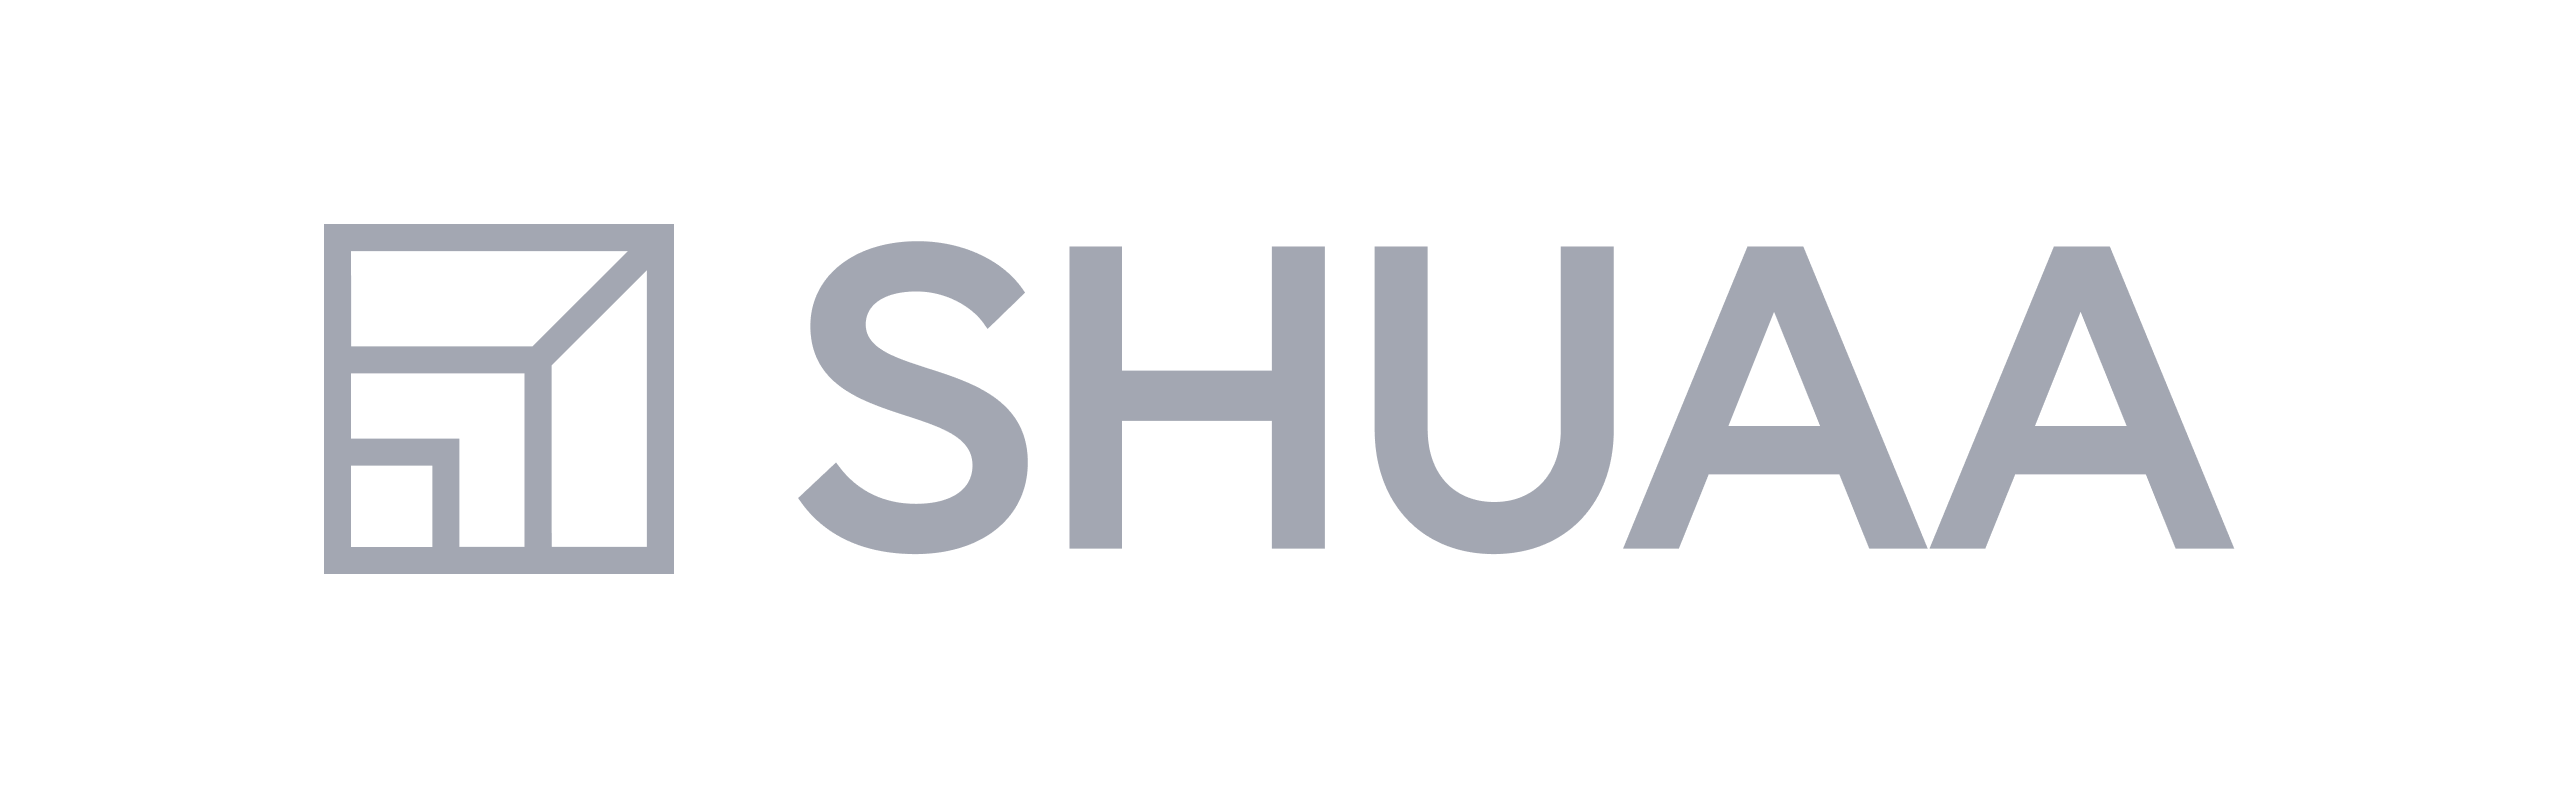 Technology & product due diligence | Code & Co. advises SHUAA (logo shown)